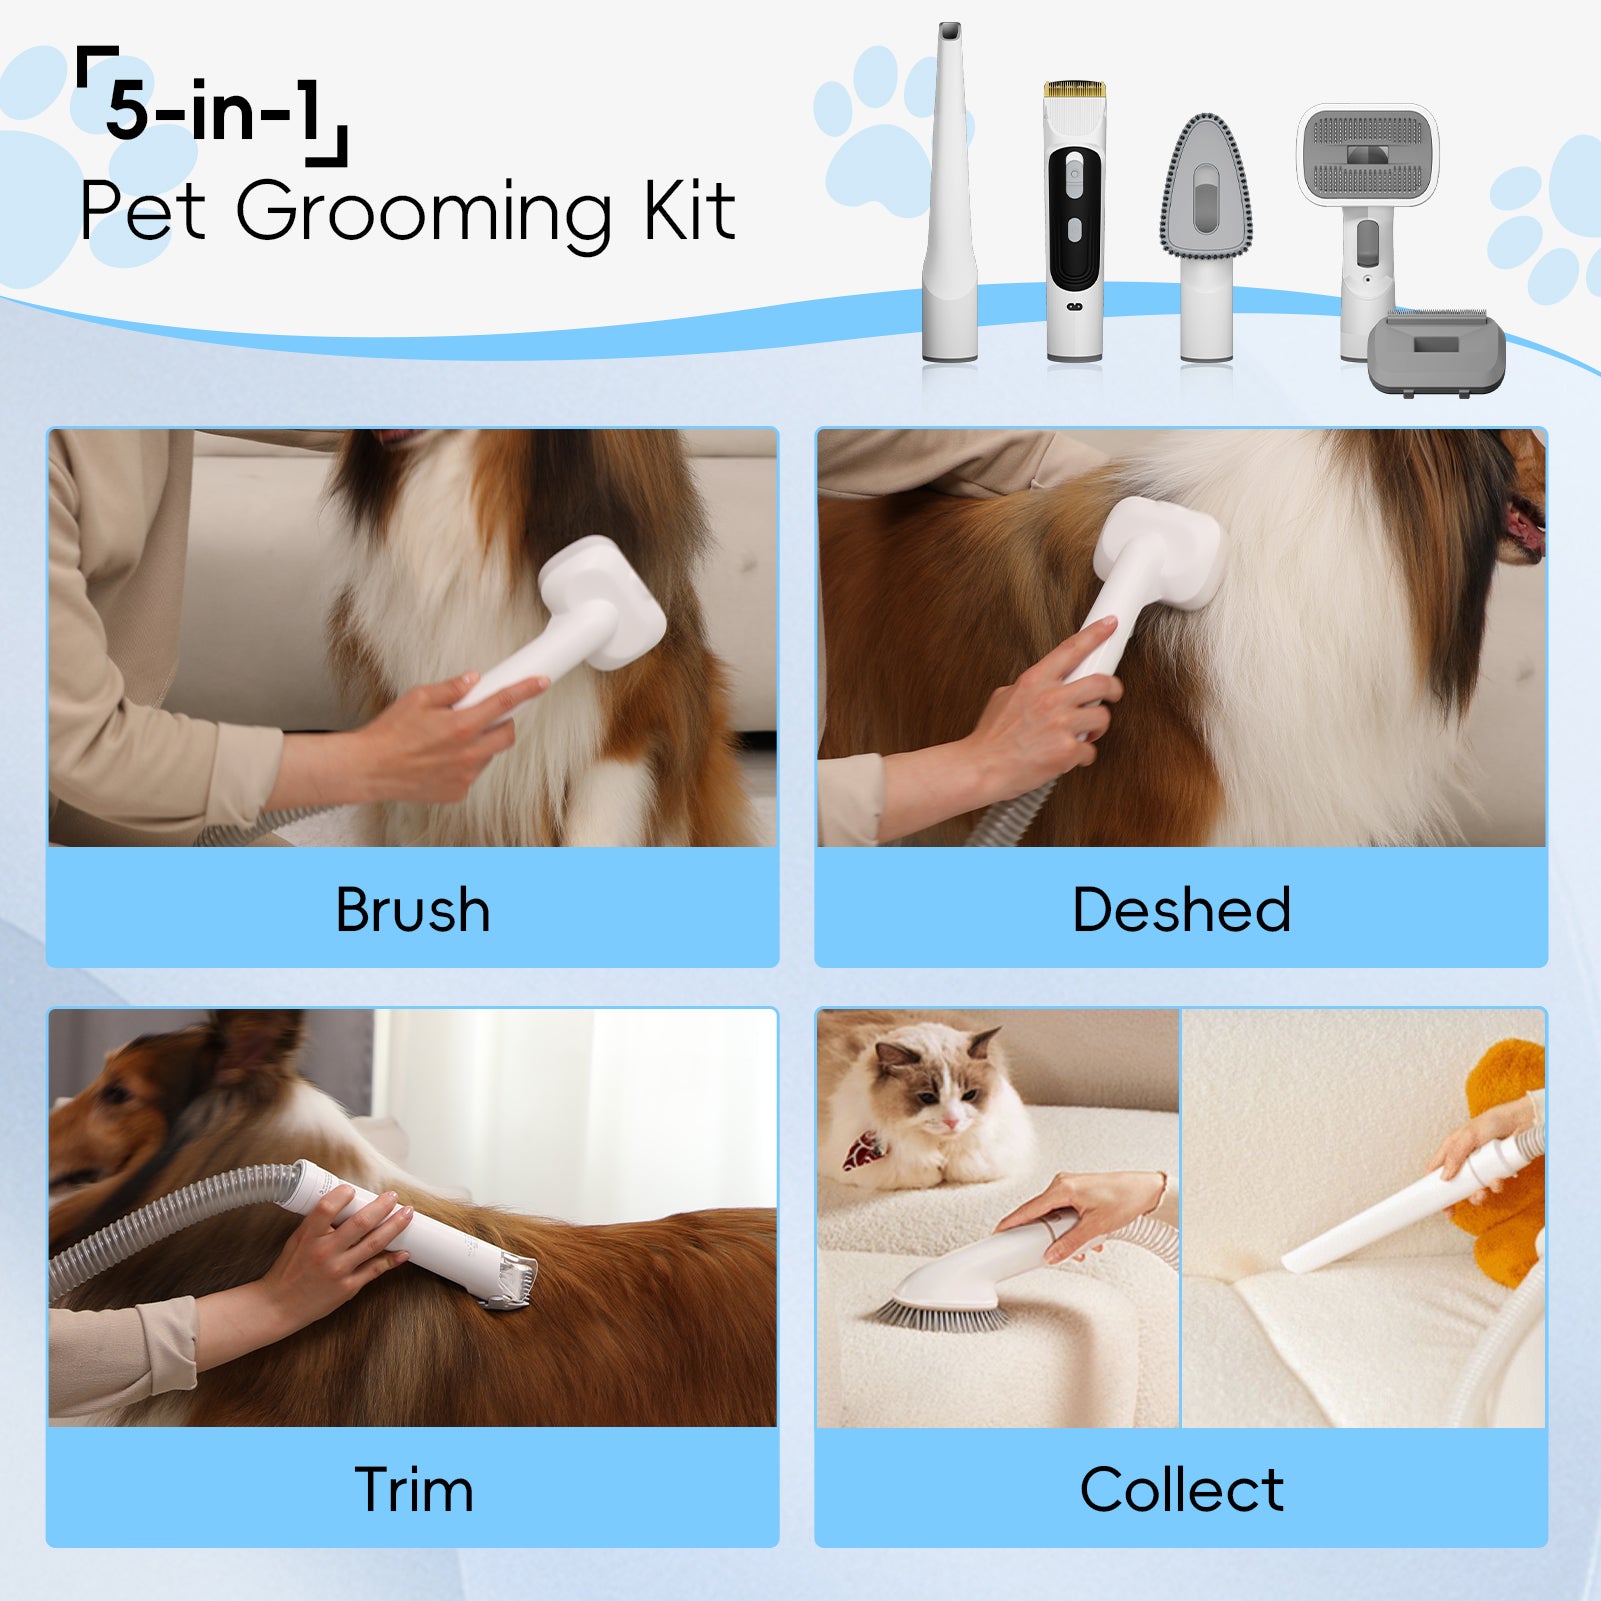 WHALL® Pet Grooming Vacuum, Dog Hair Vacuum with 3 Modes, 5 In 1 Kit, 3L Large Dustbin, Low Noise